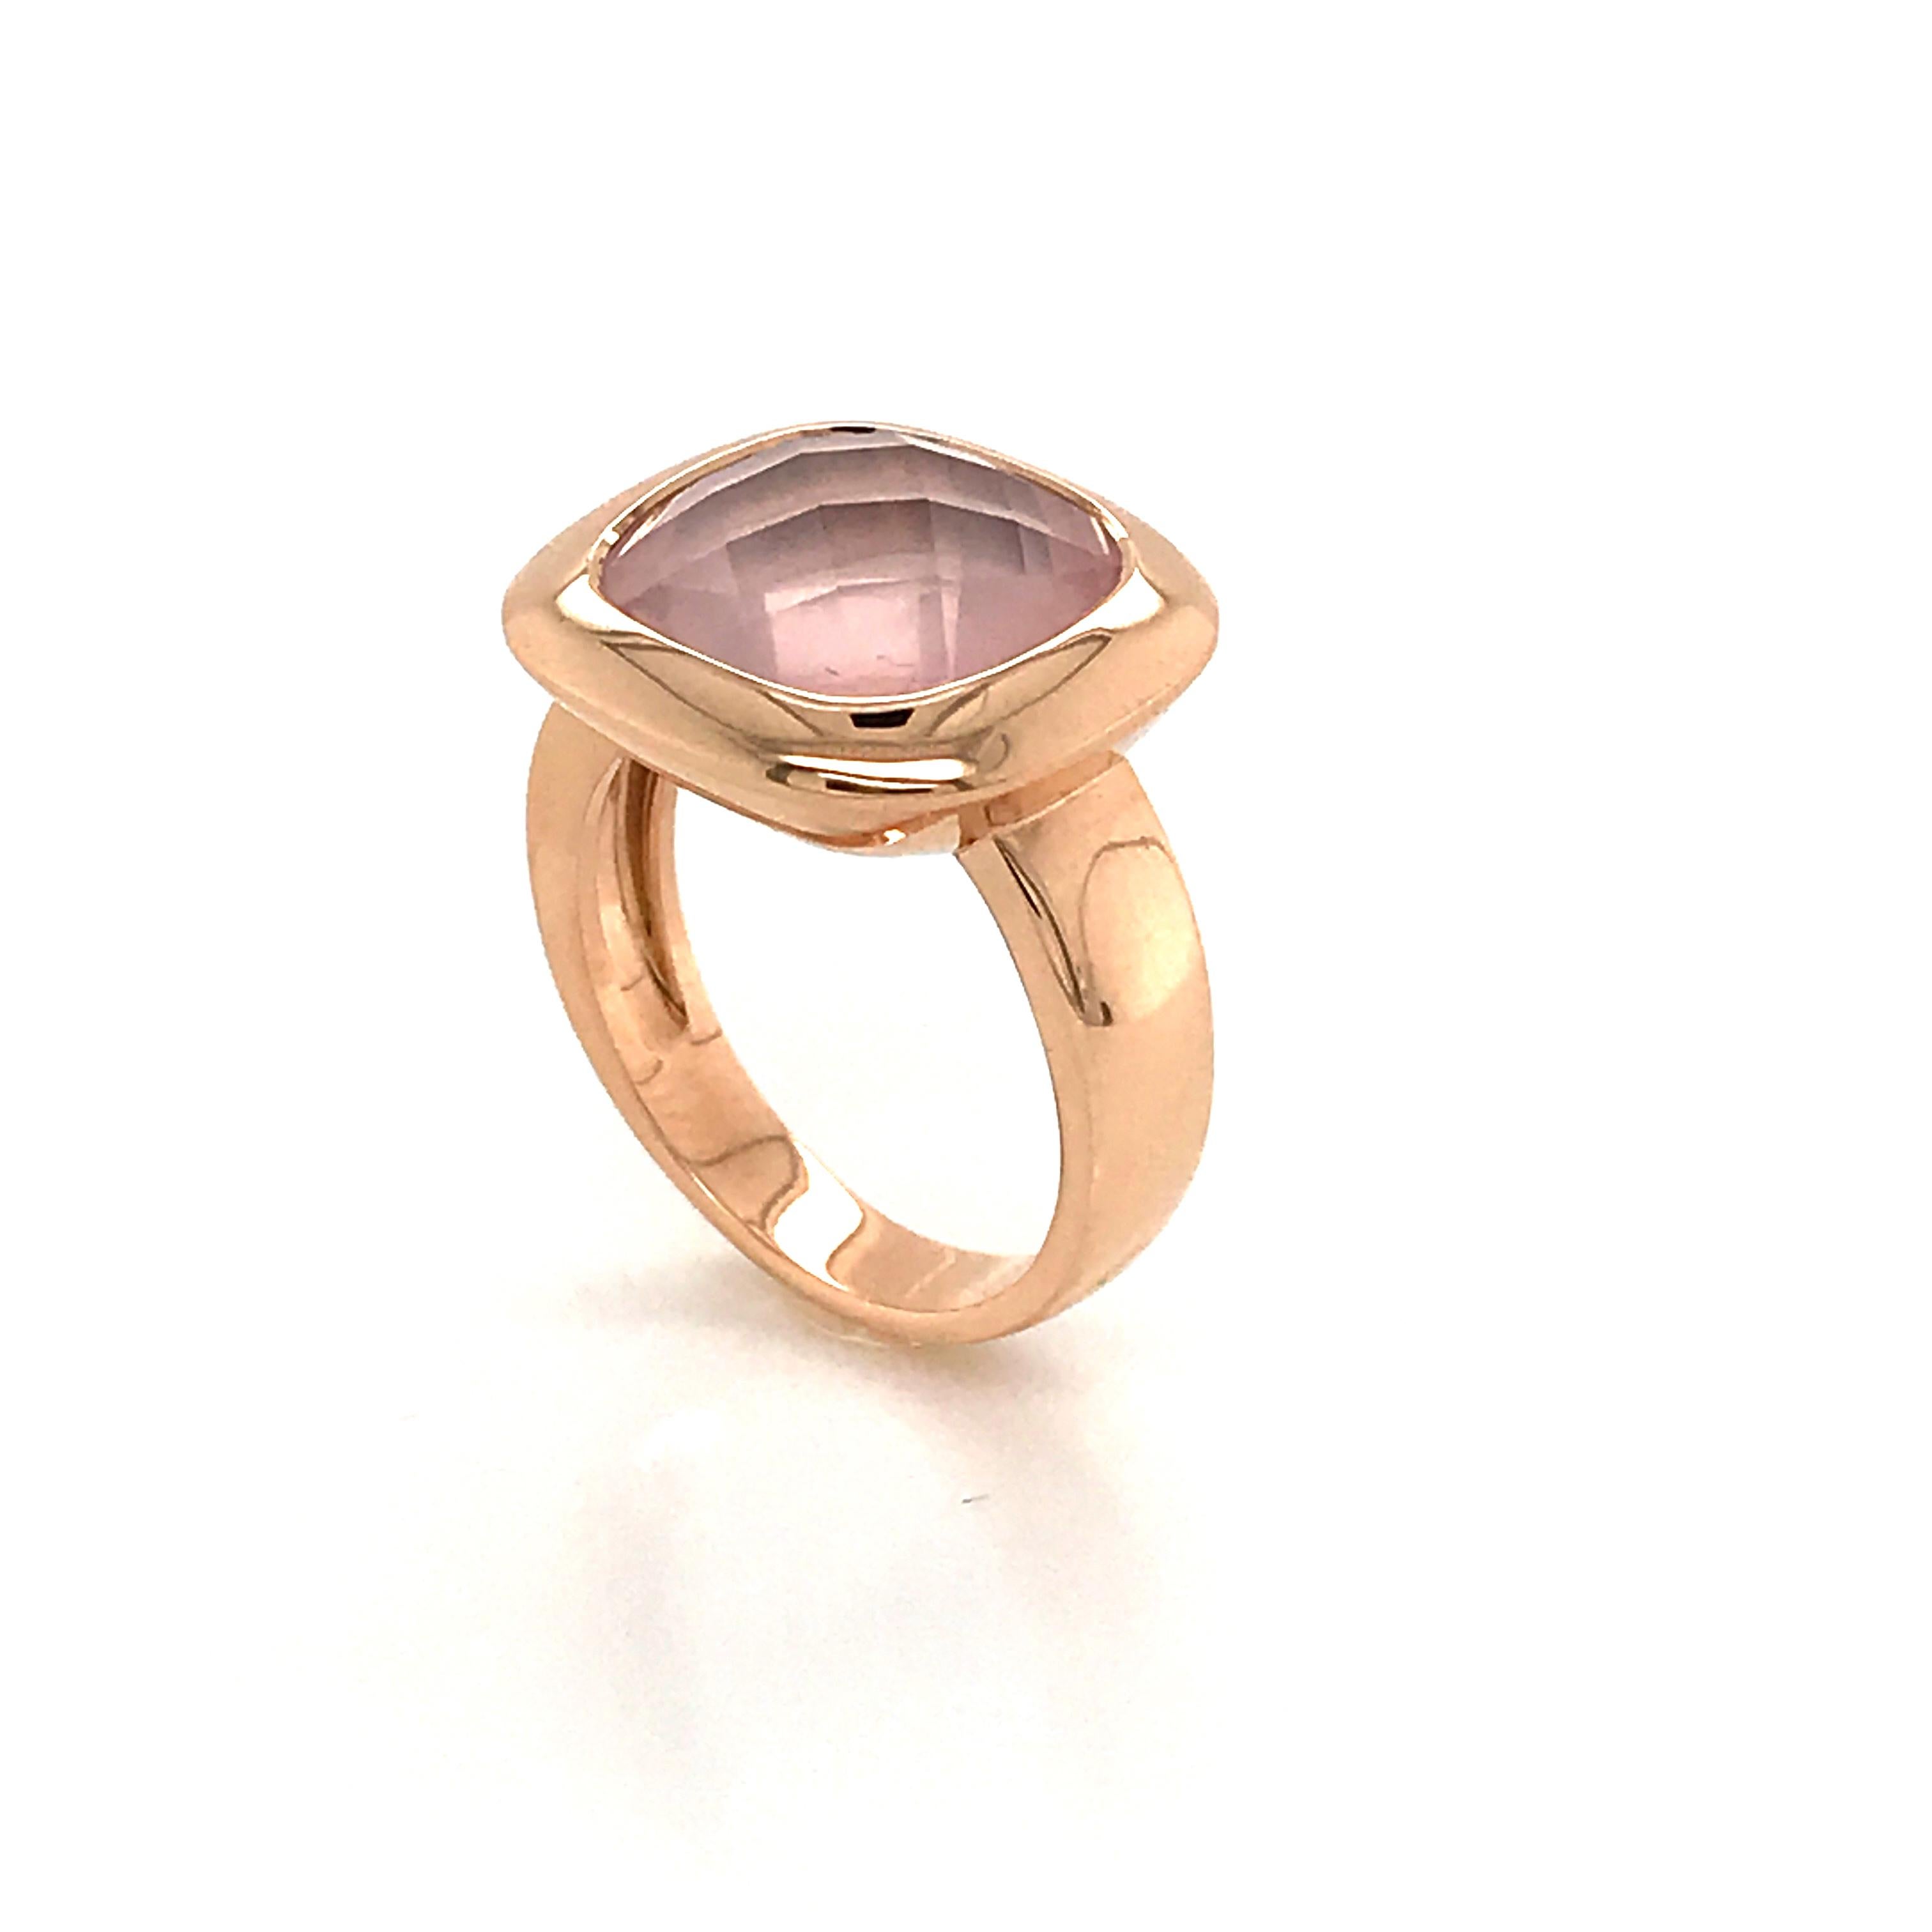 Discover this natural pink quartz Briolette cut 
on Rosegold 18 carat 9.55 grams
US size 6.5
French Size 53
